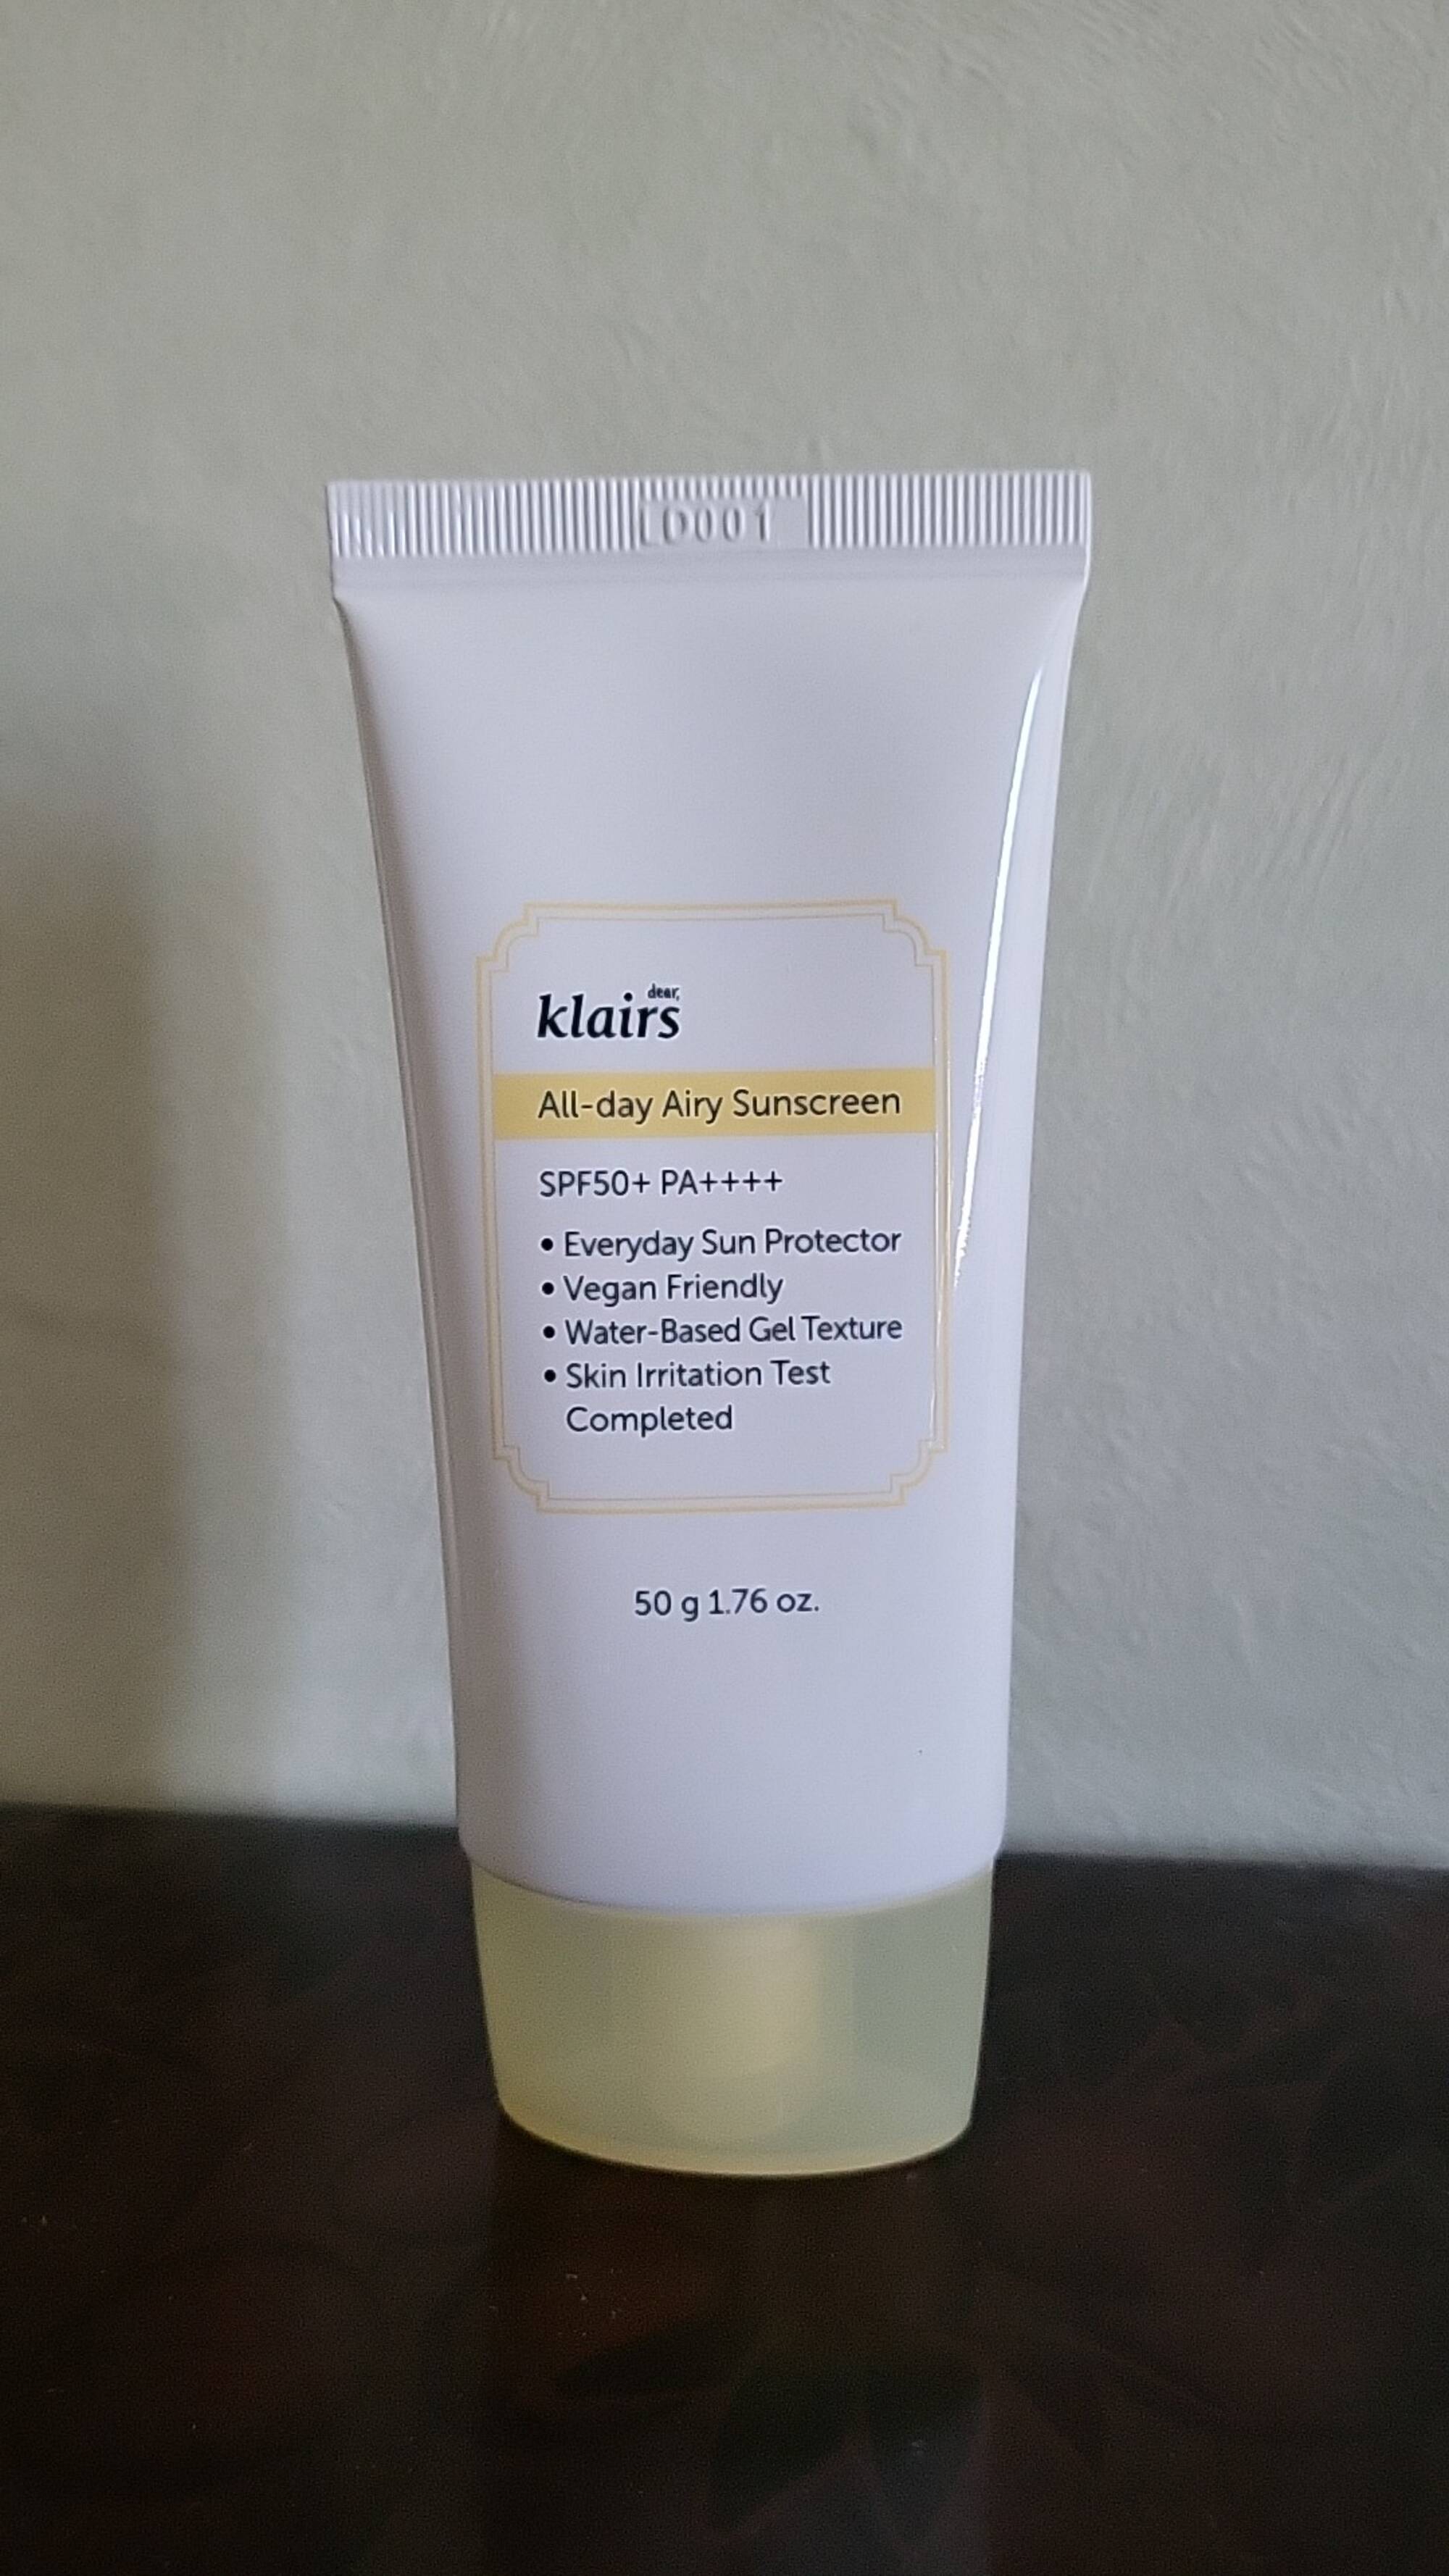 KLAIRS - All-day airy sunscreen SPF50+